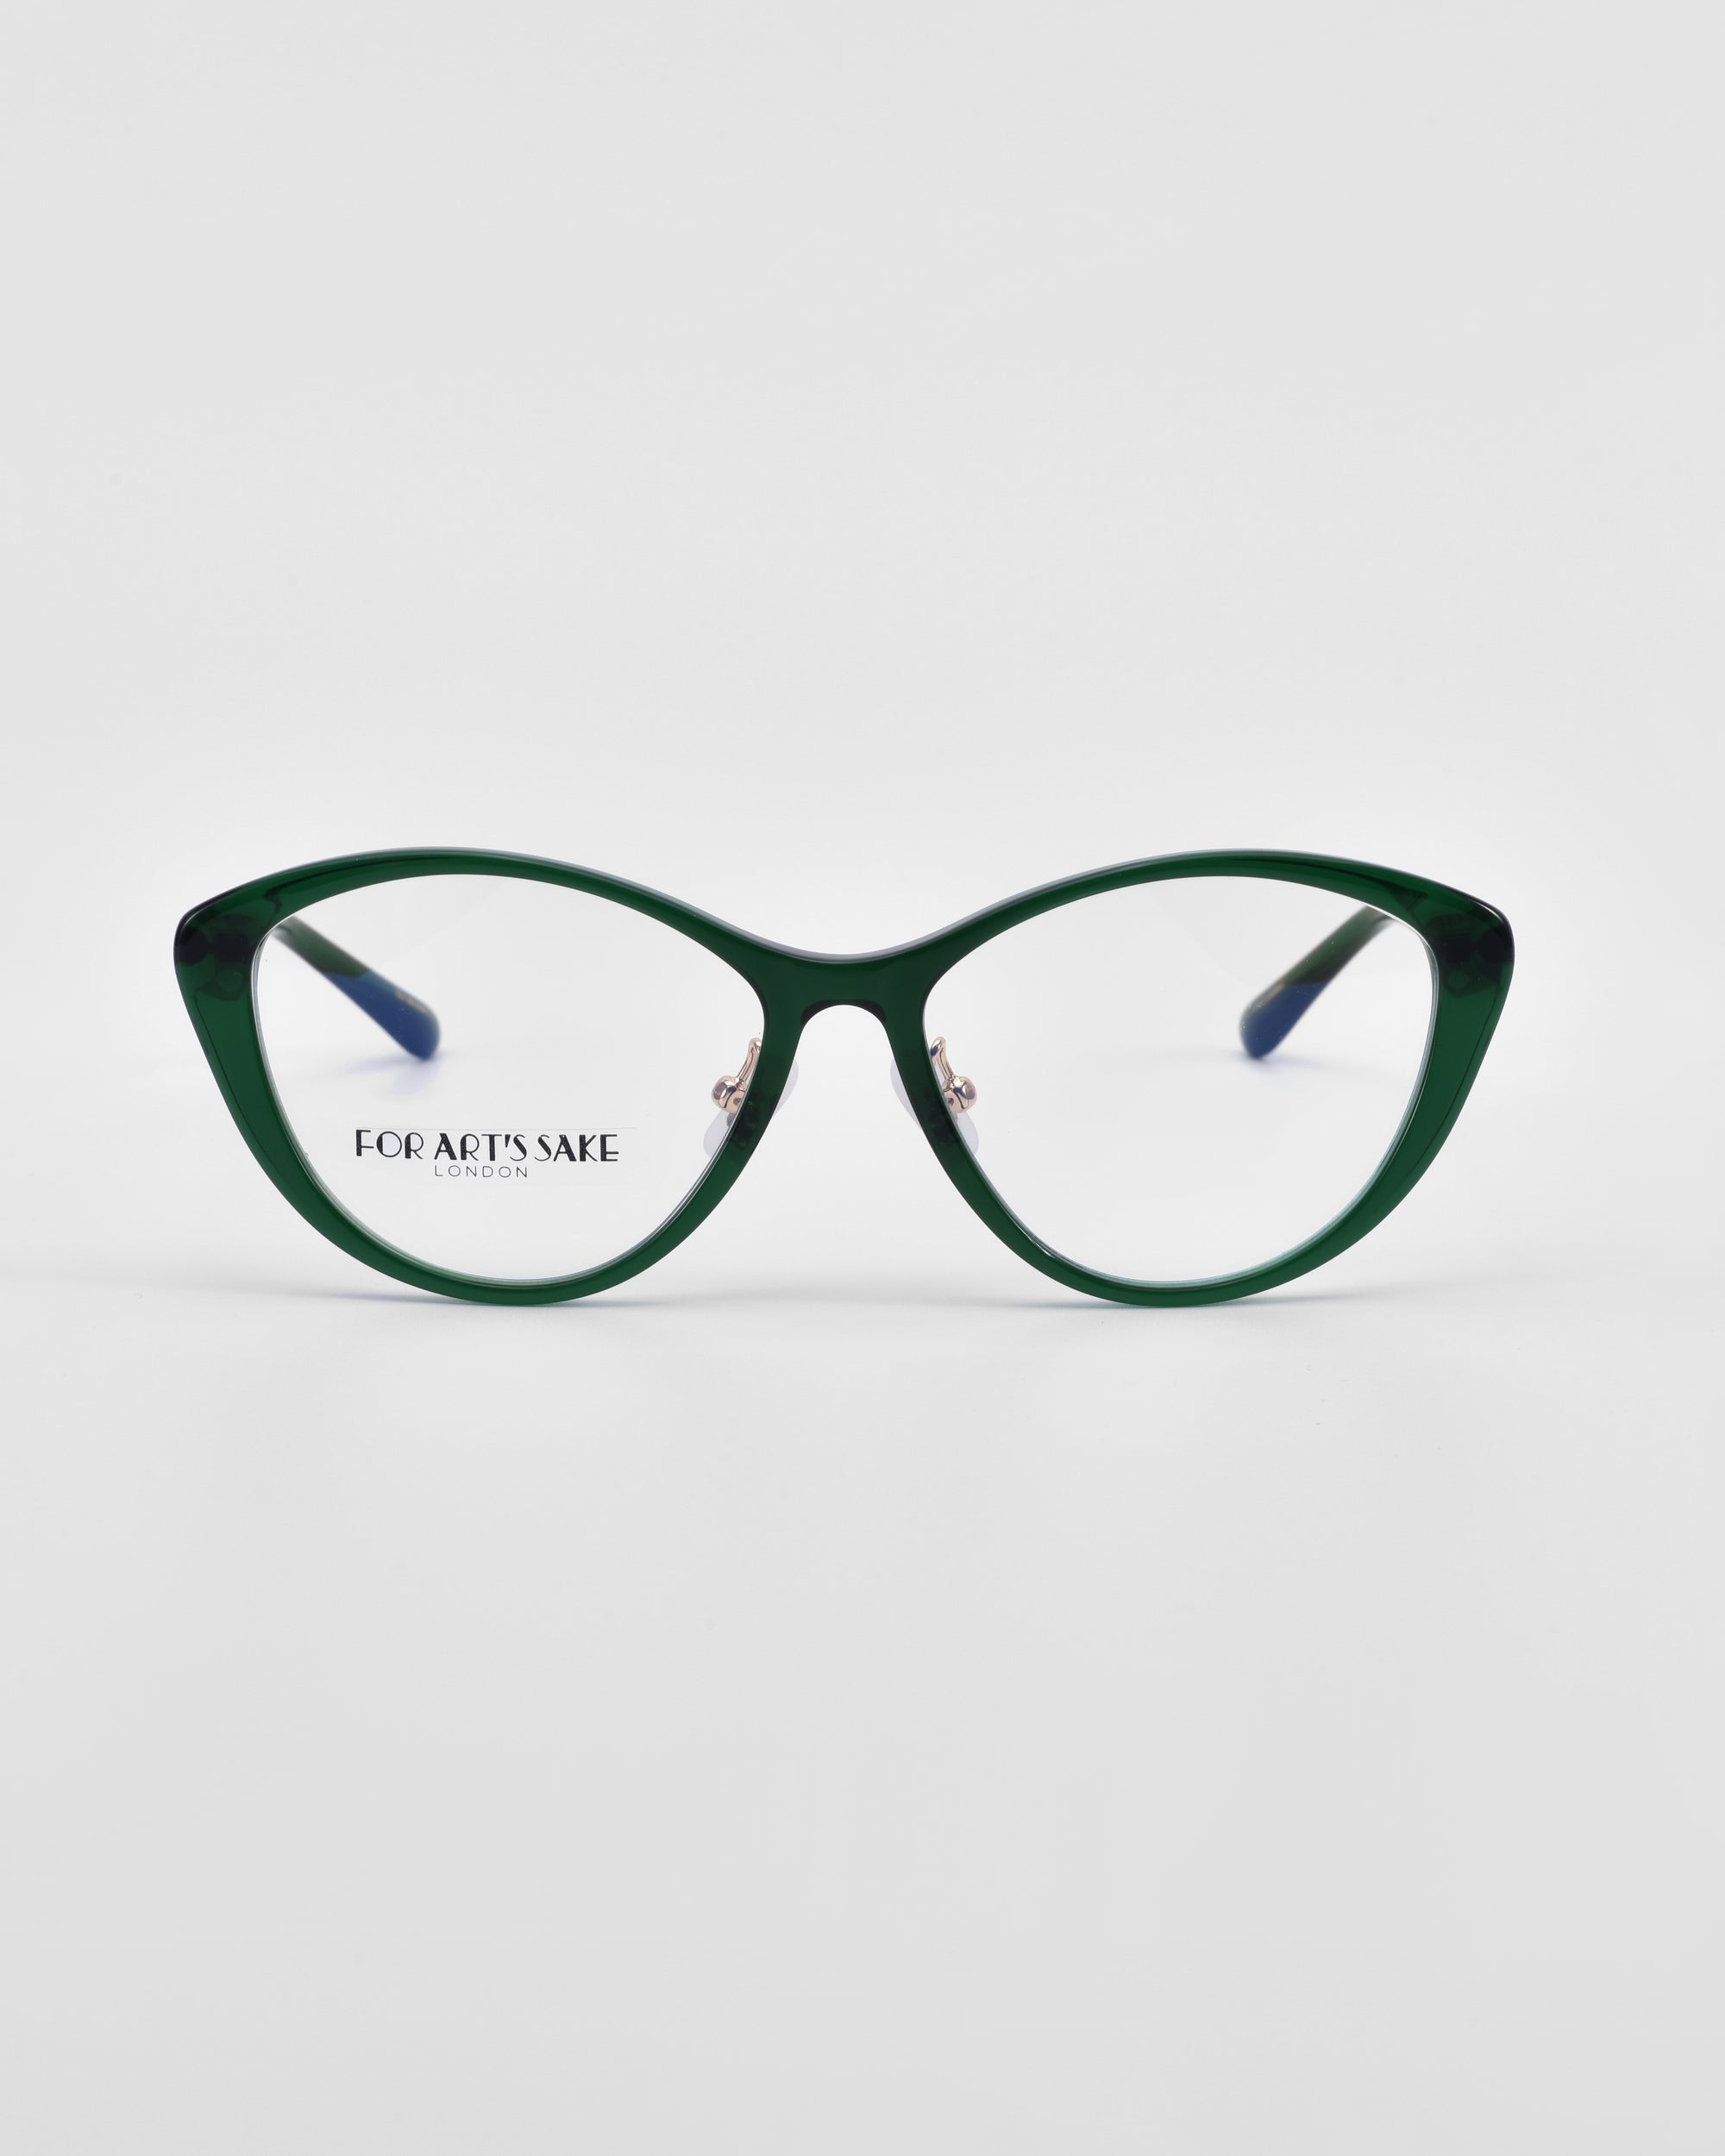 A pair of stylish green cat-eye eyeglasses with blue temples and jade-stone nose pads. The lenses are clear, and the words "For Art's Sake®" are printed on the left lens. These Perla II eyeglasses boast an optical design finesse and are set against a plain white background.